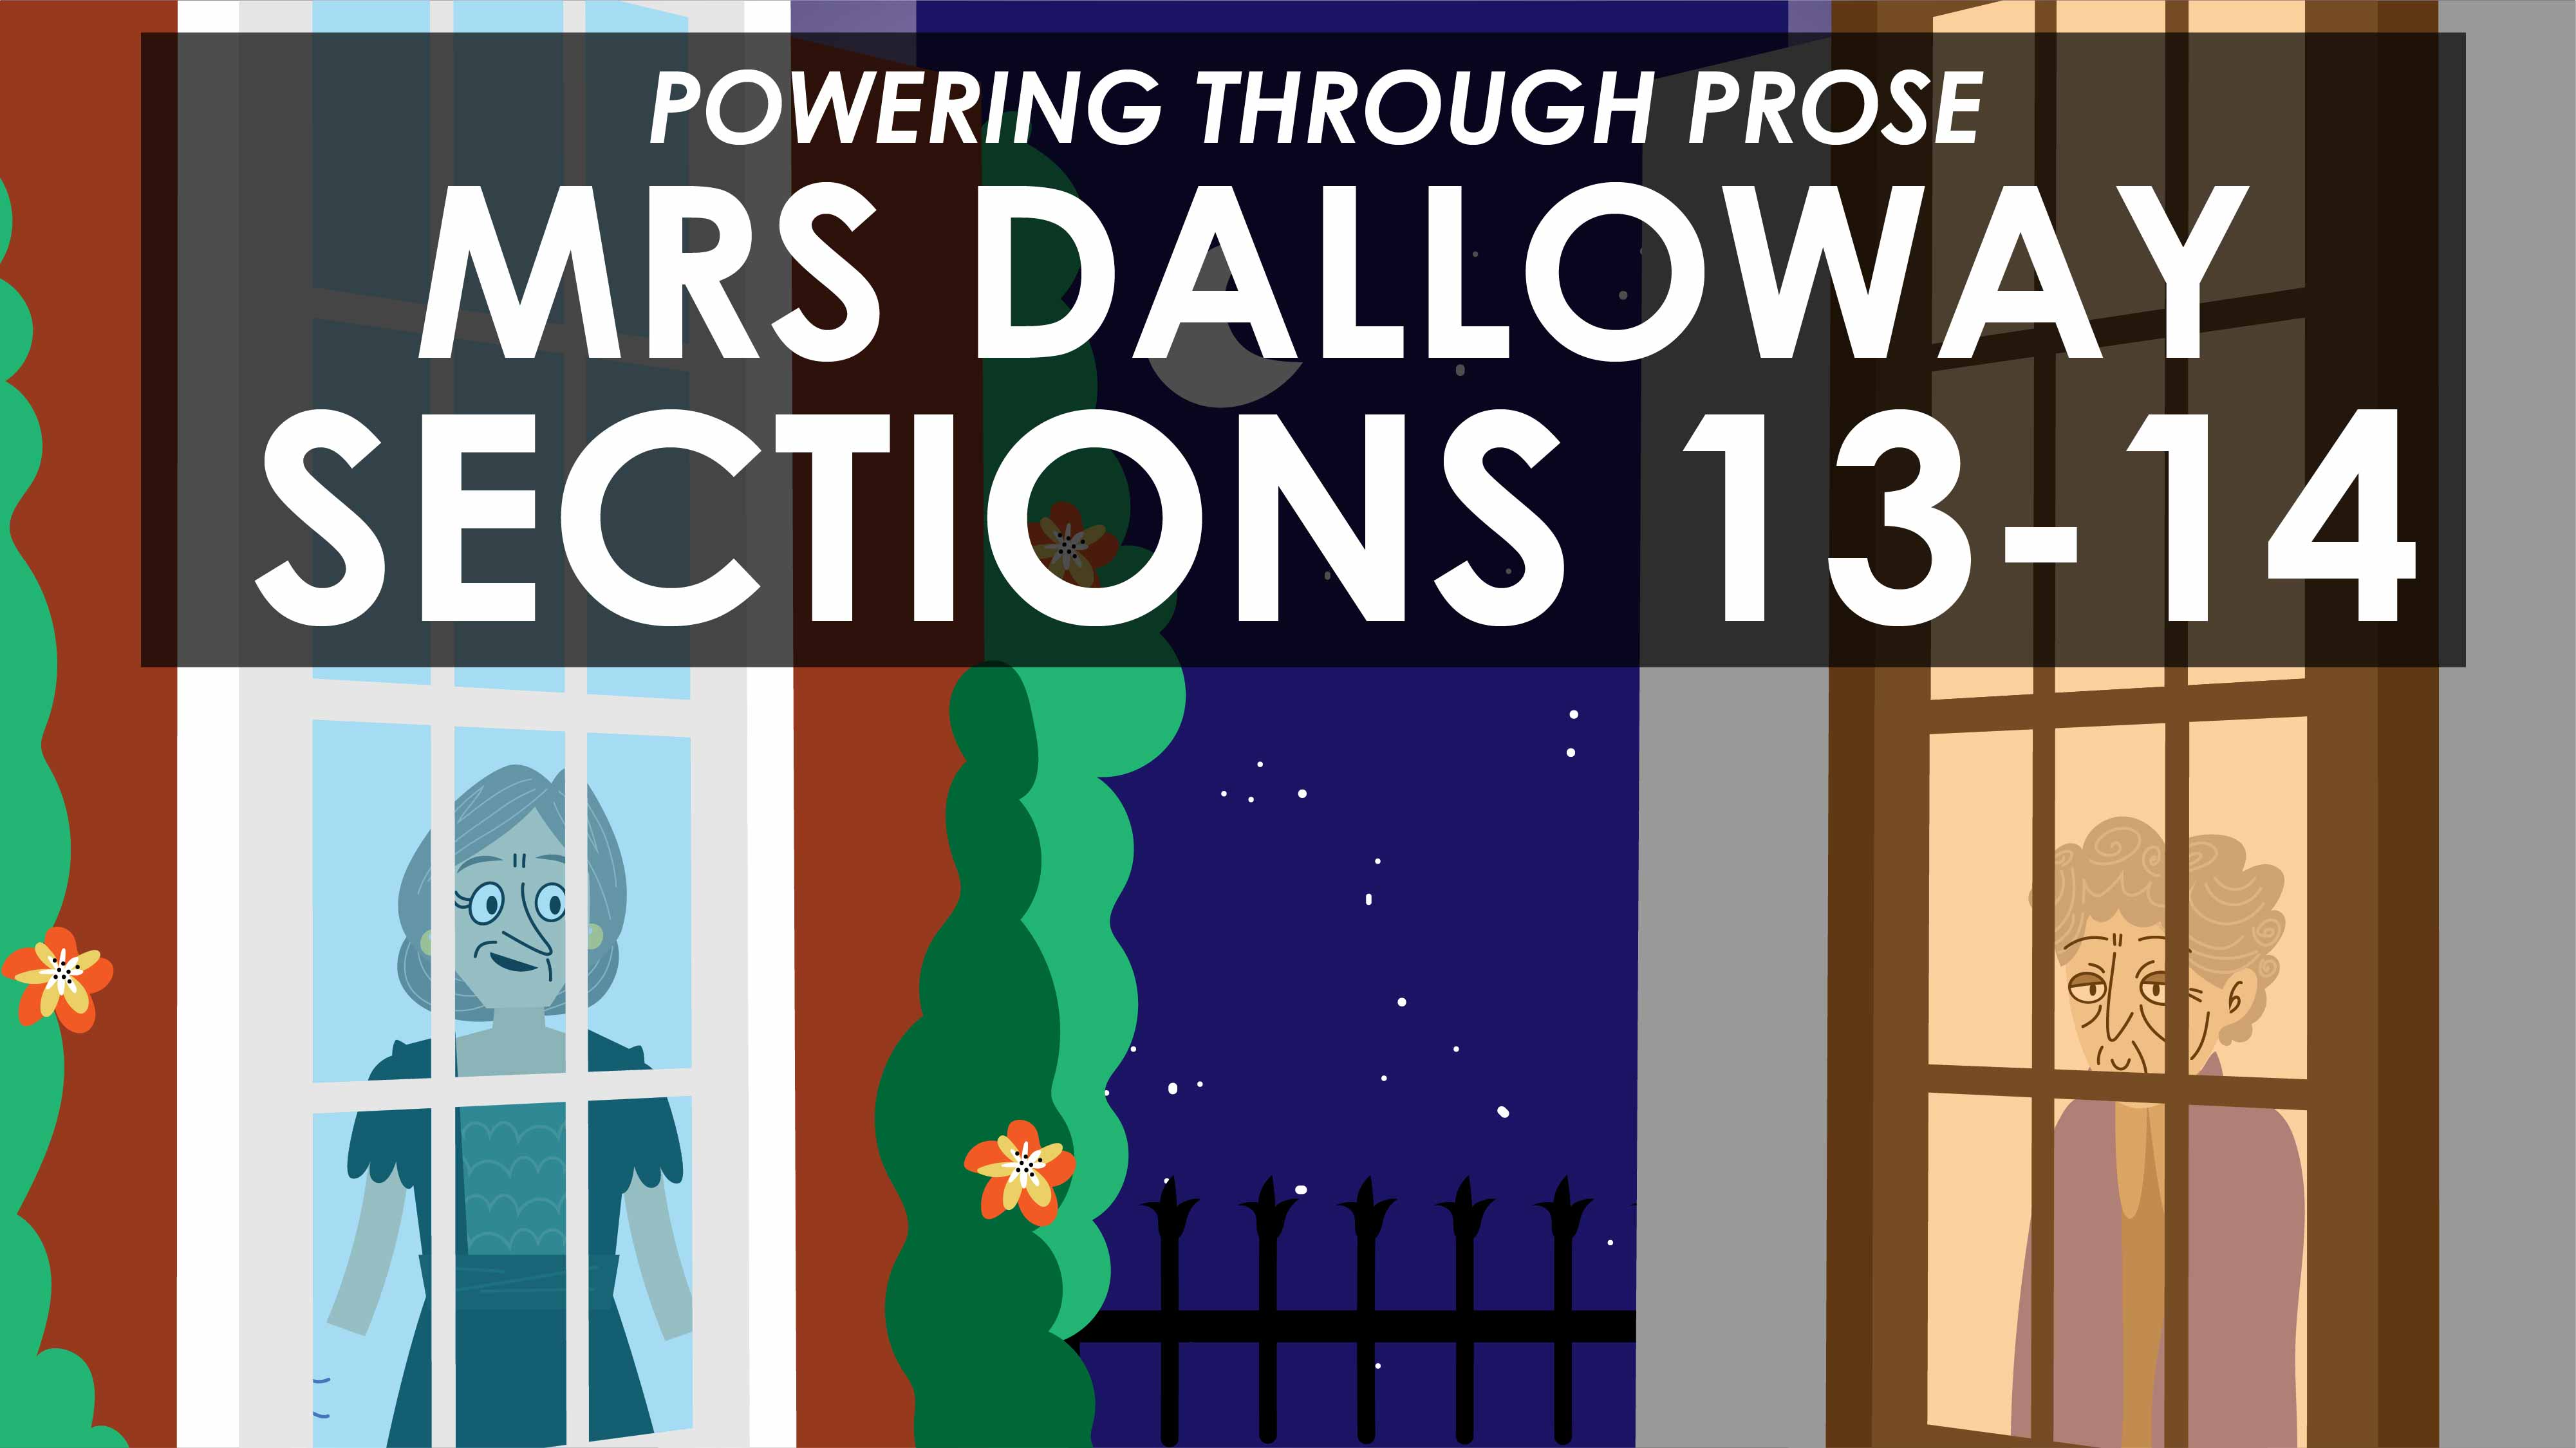 Mrs Dalloway - Virginia Woolf - Sections 13-14 - Powering Through Prose Series